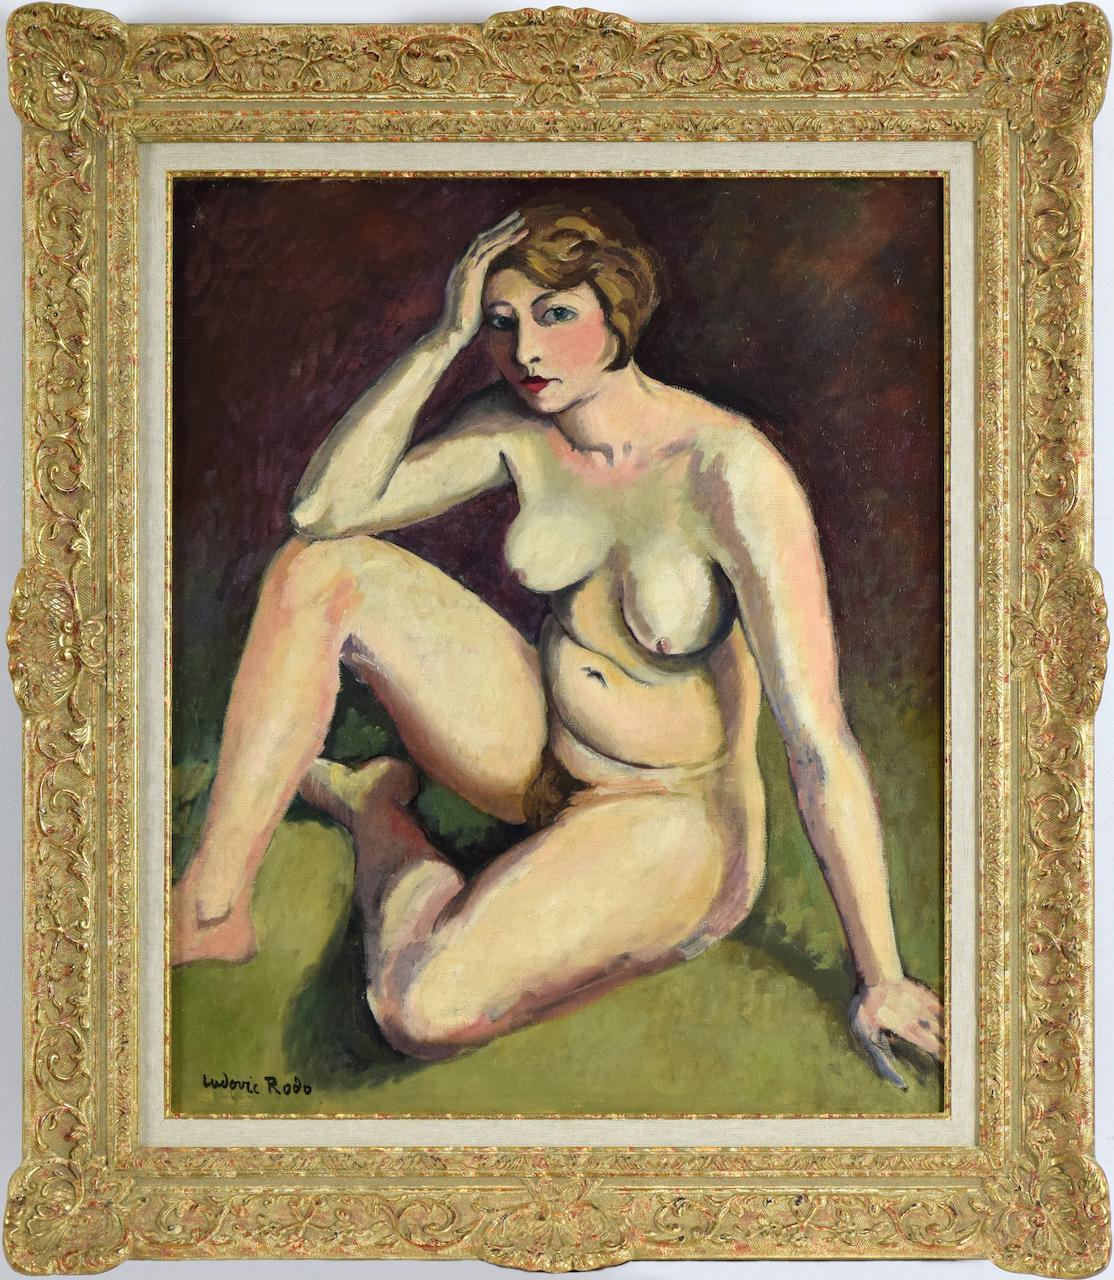 Ludovic-Rodo Pissarro Nude Painting - The Thinker (La Penseuse) by Ludovic Rodo Pissarro, Nude Oil Painting, Fauvism